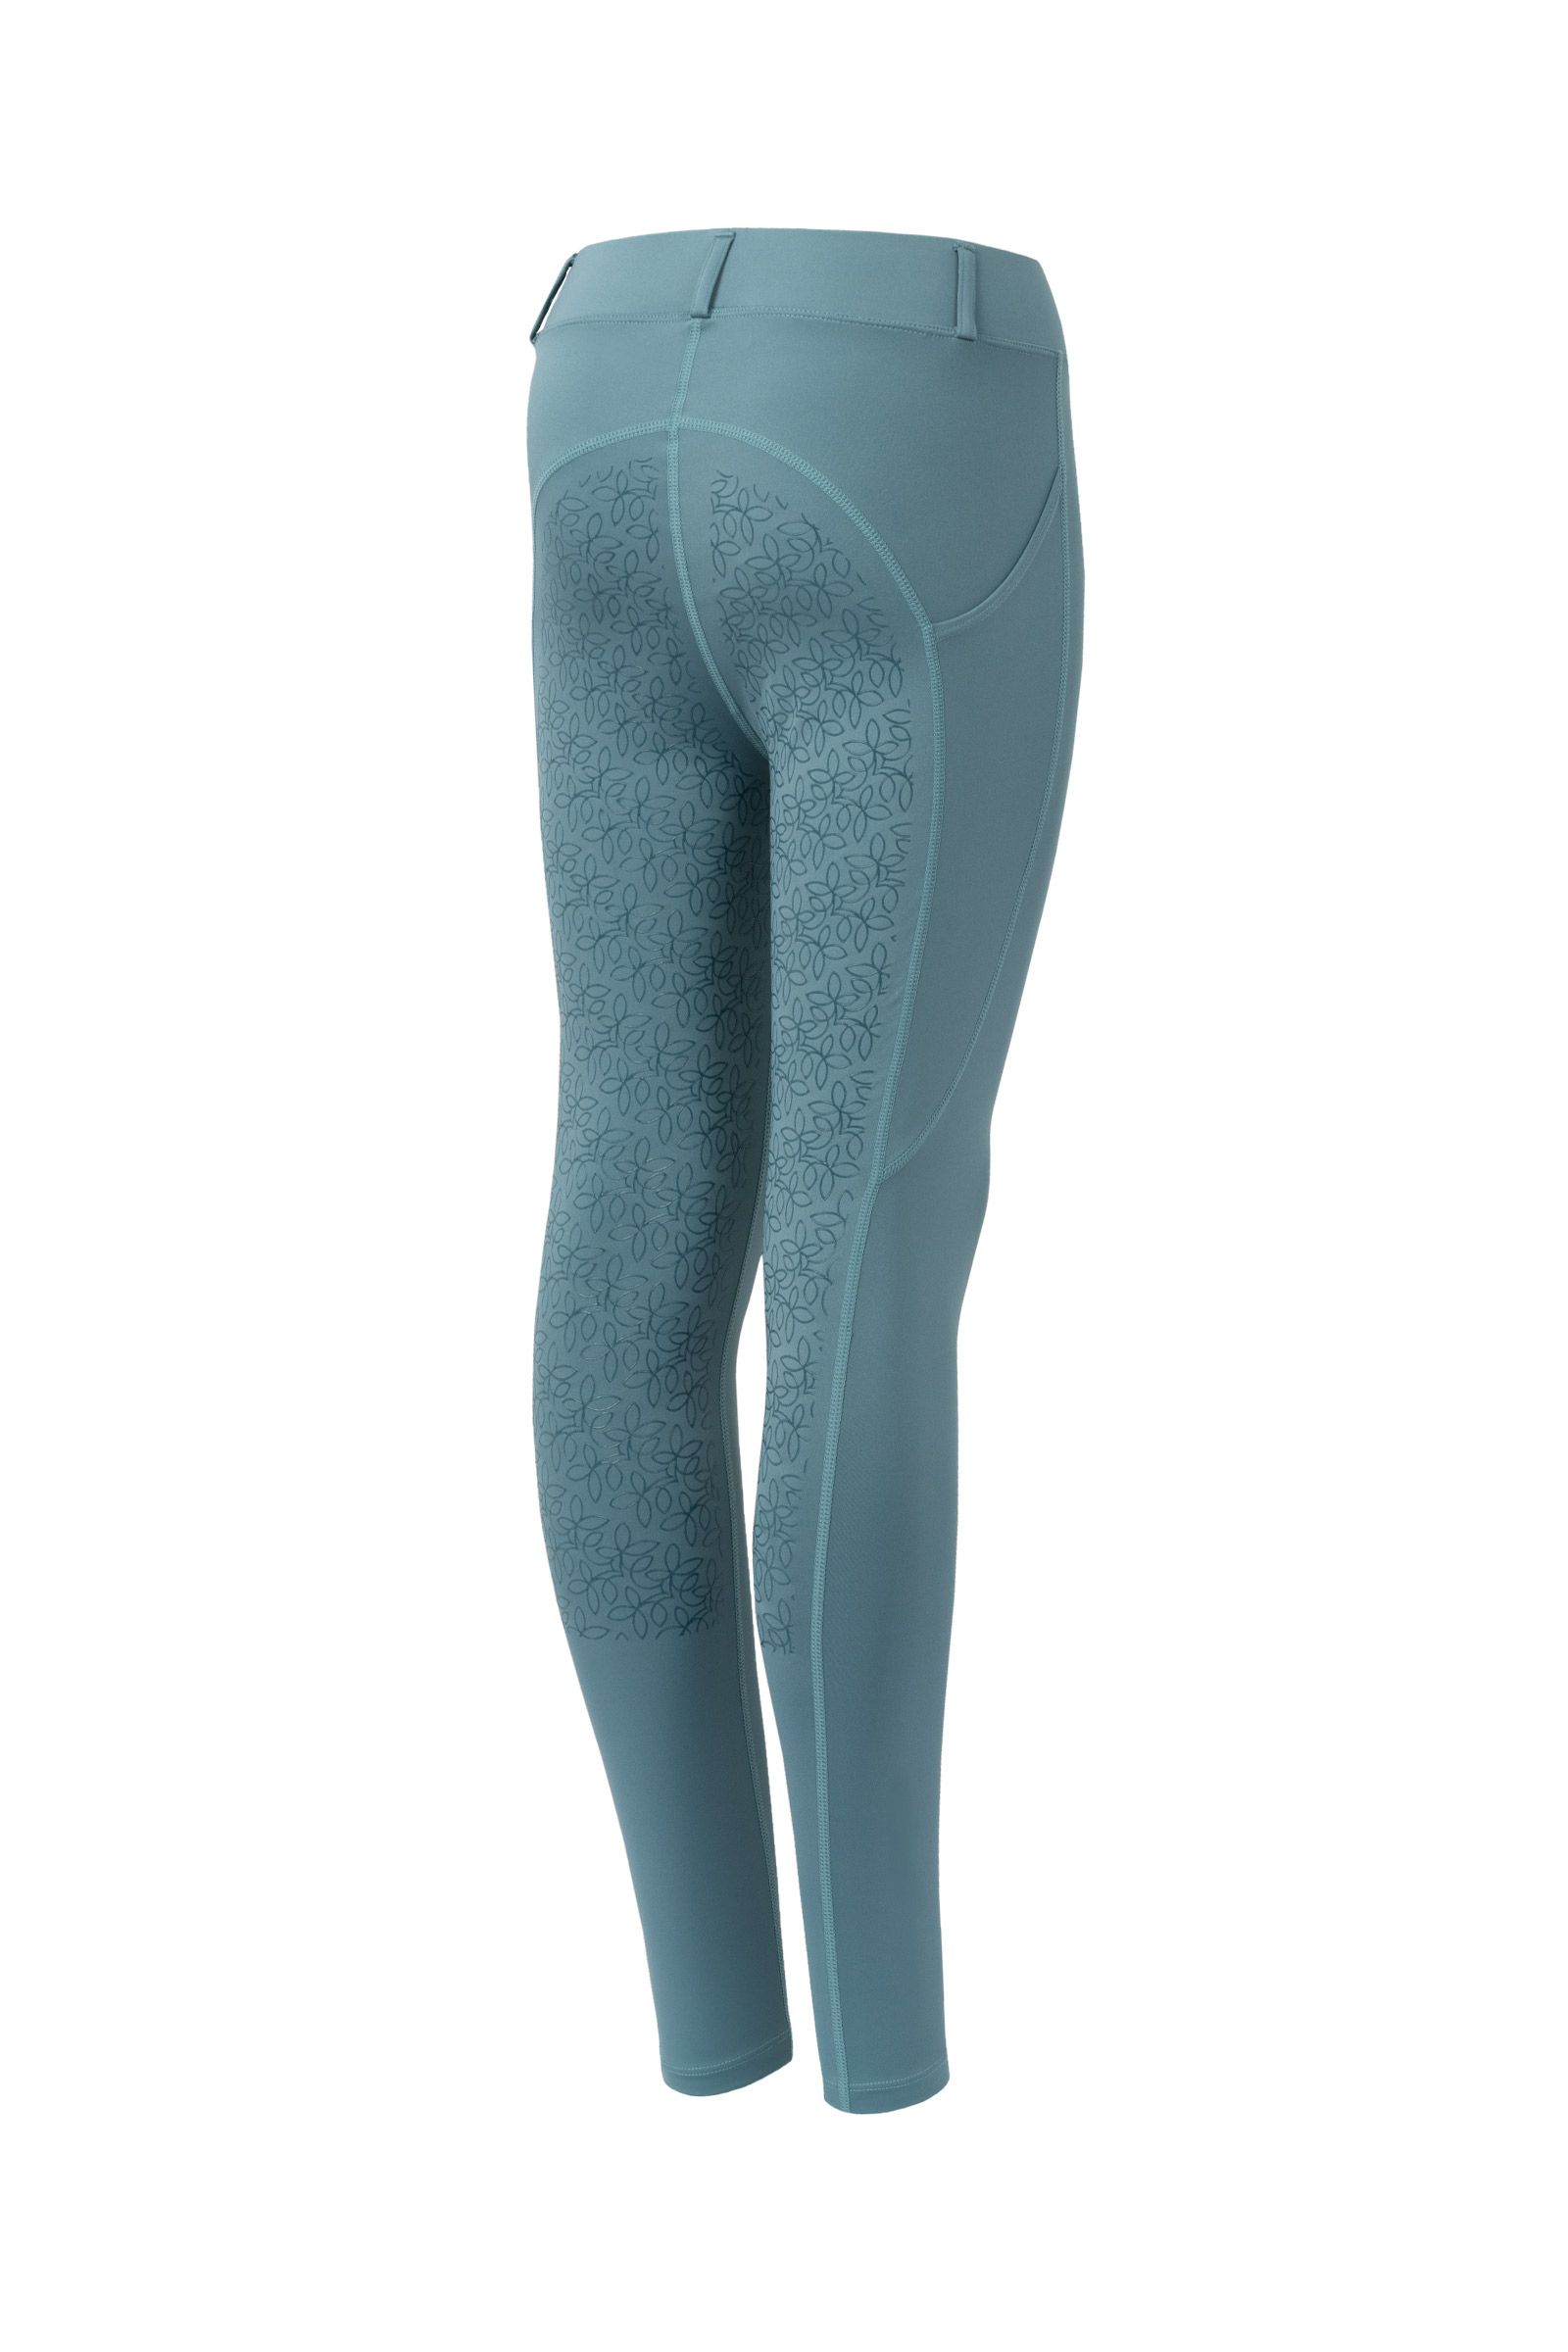 Buy Horze Leighton Teens Silicone Full Grip Riding Tights with Warm Lining